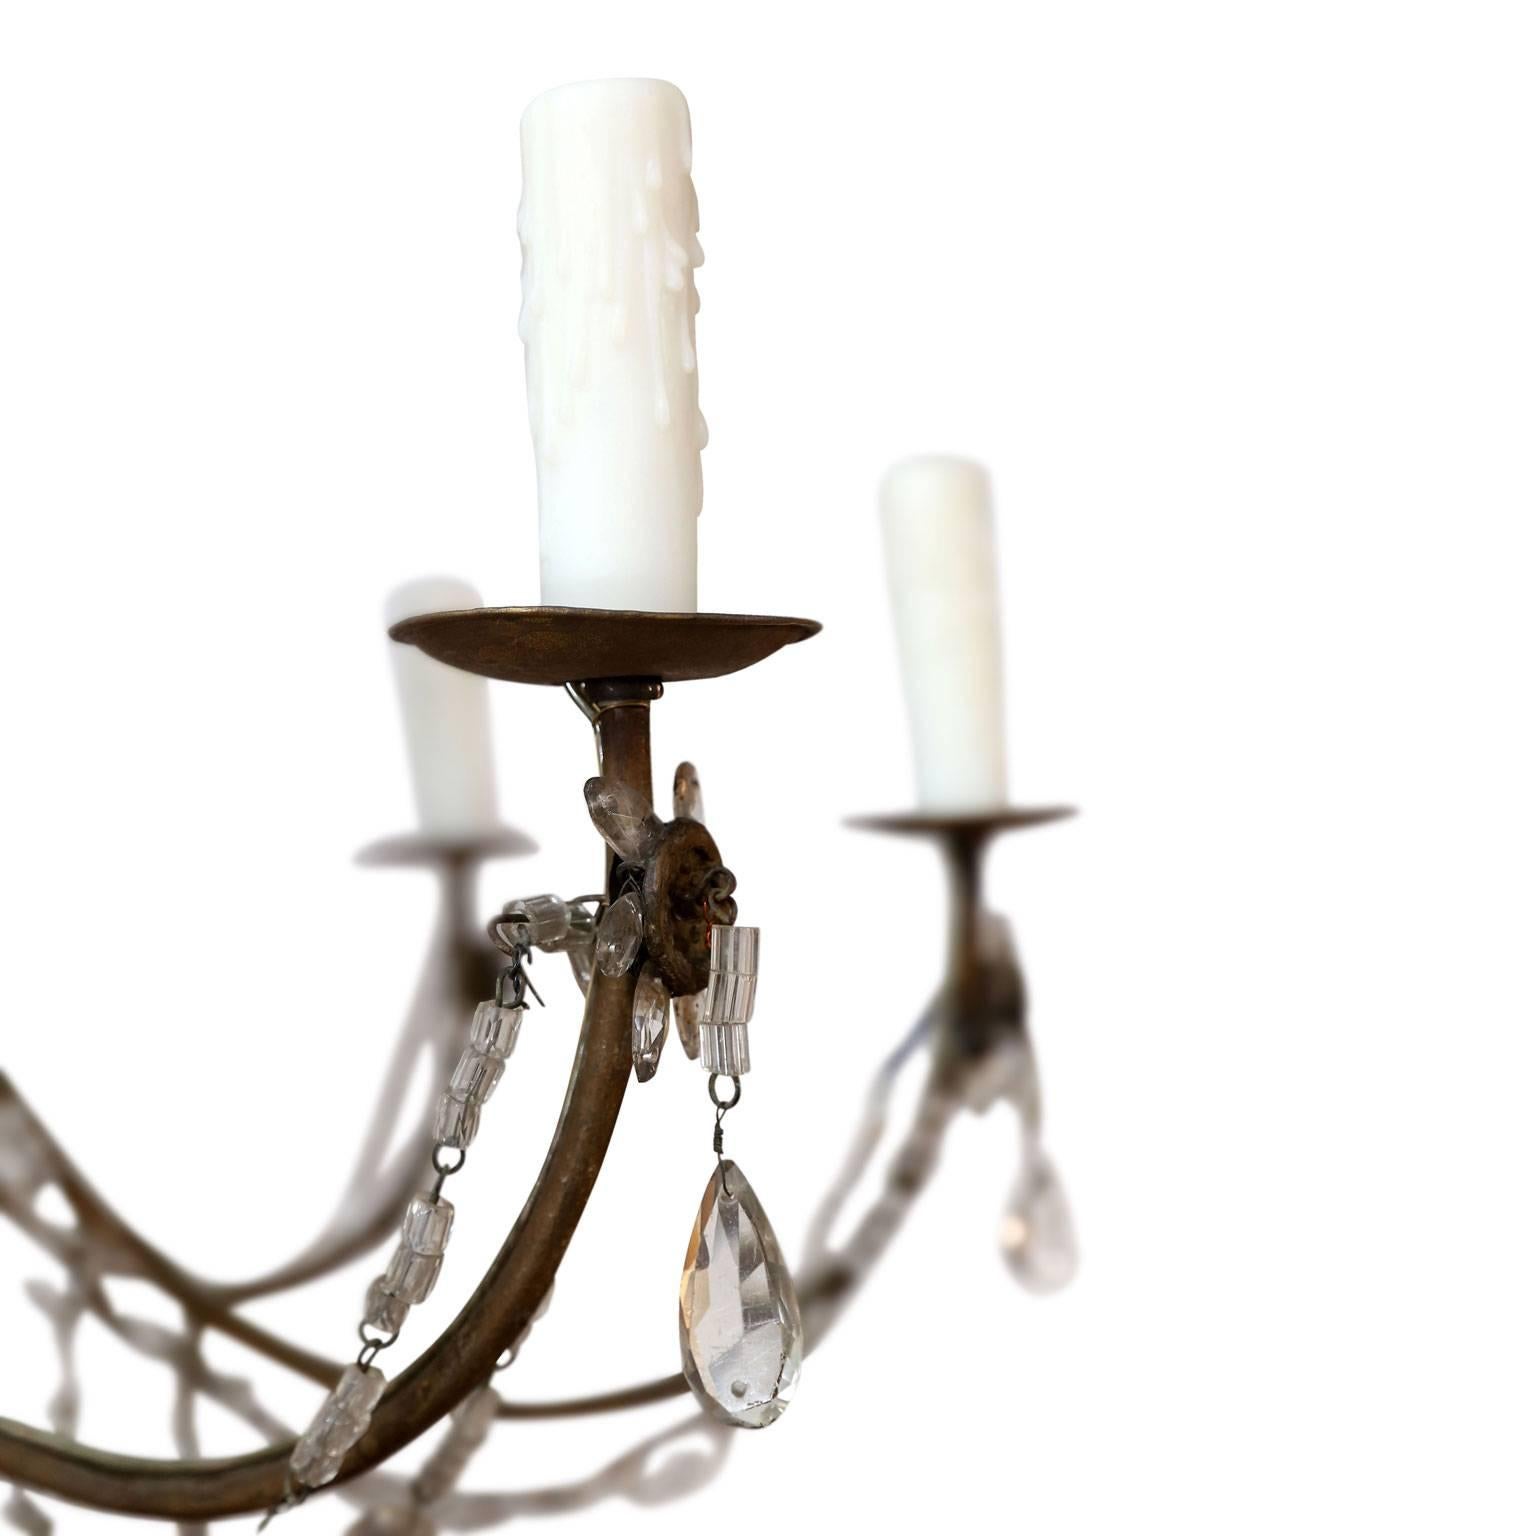 Italian Pair of 18th Century Chandeliers from Genoa